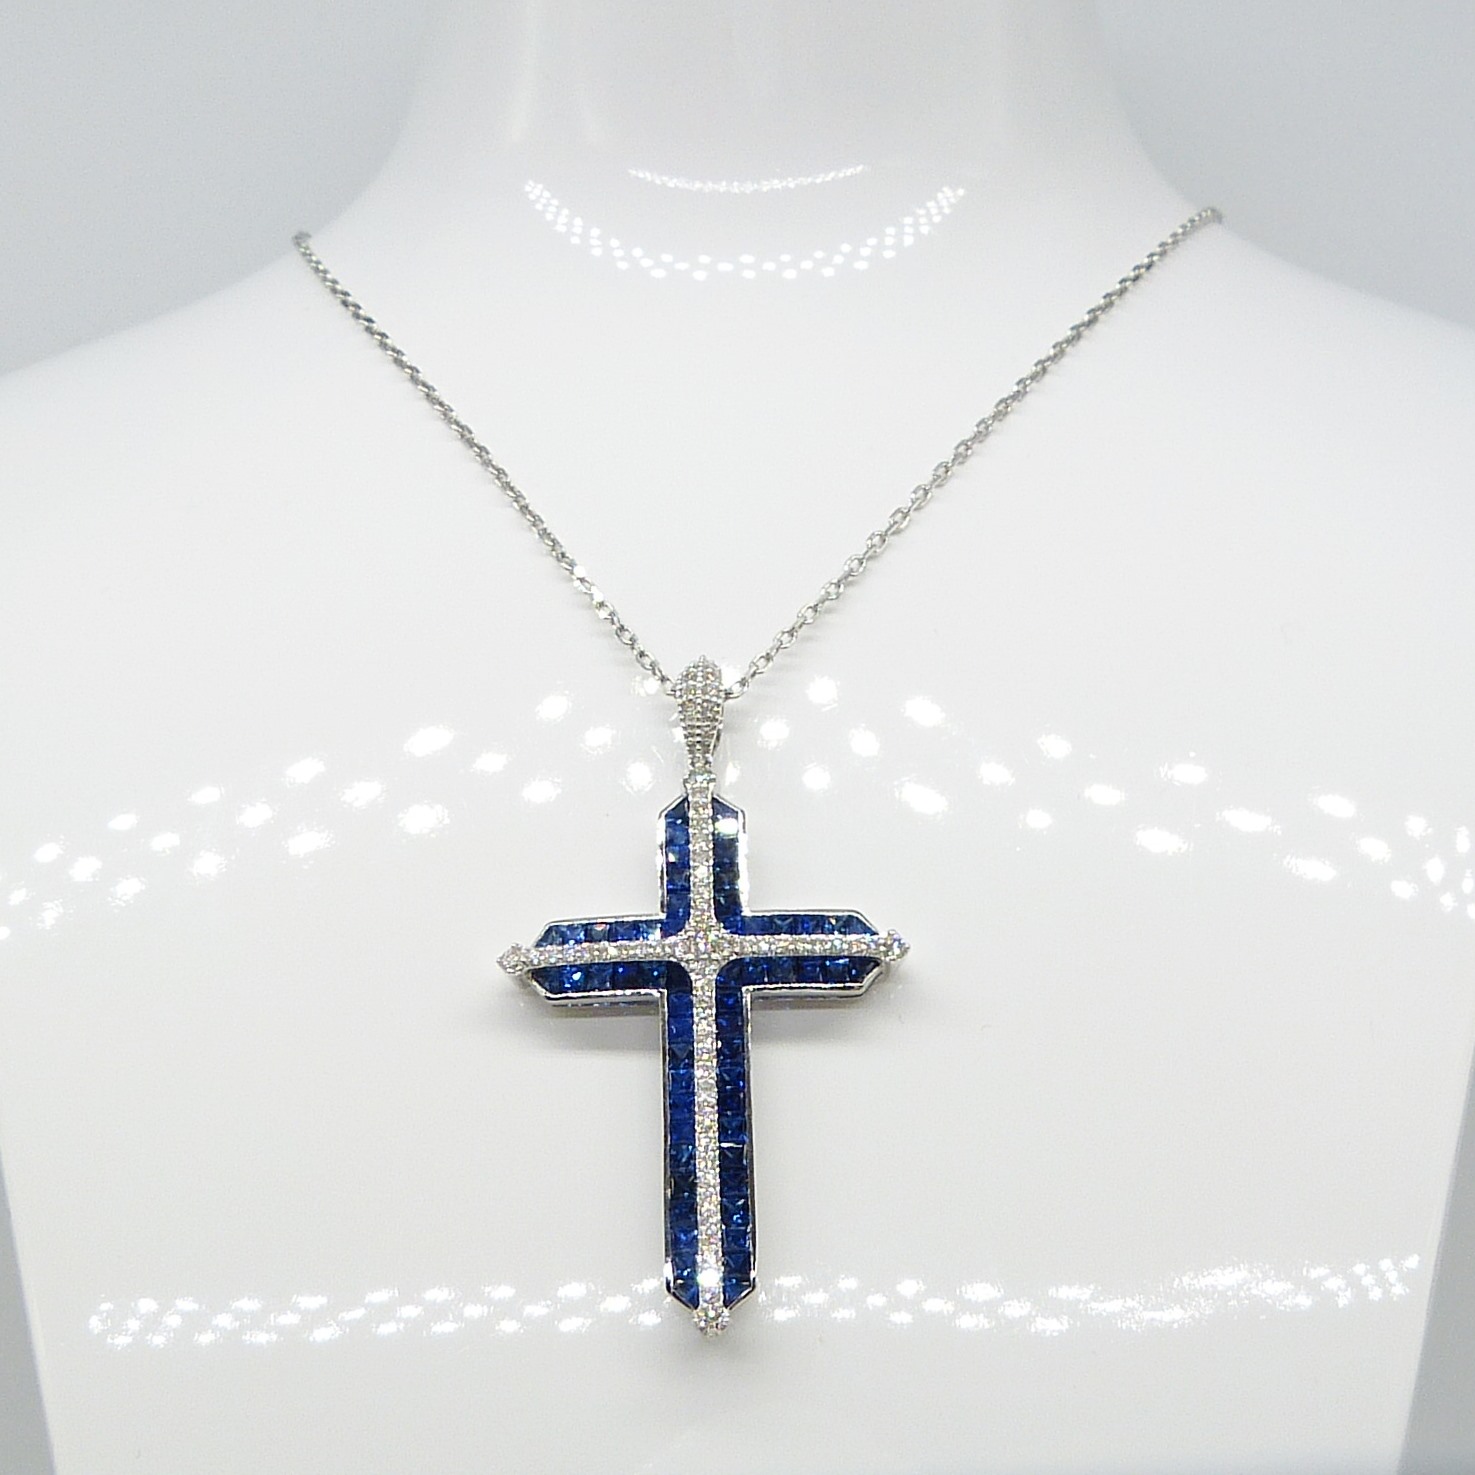 Impressive cross necklace set with natural sapphires and diamonds in 18ct white gold, boxed - Image 3 of 8